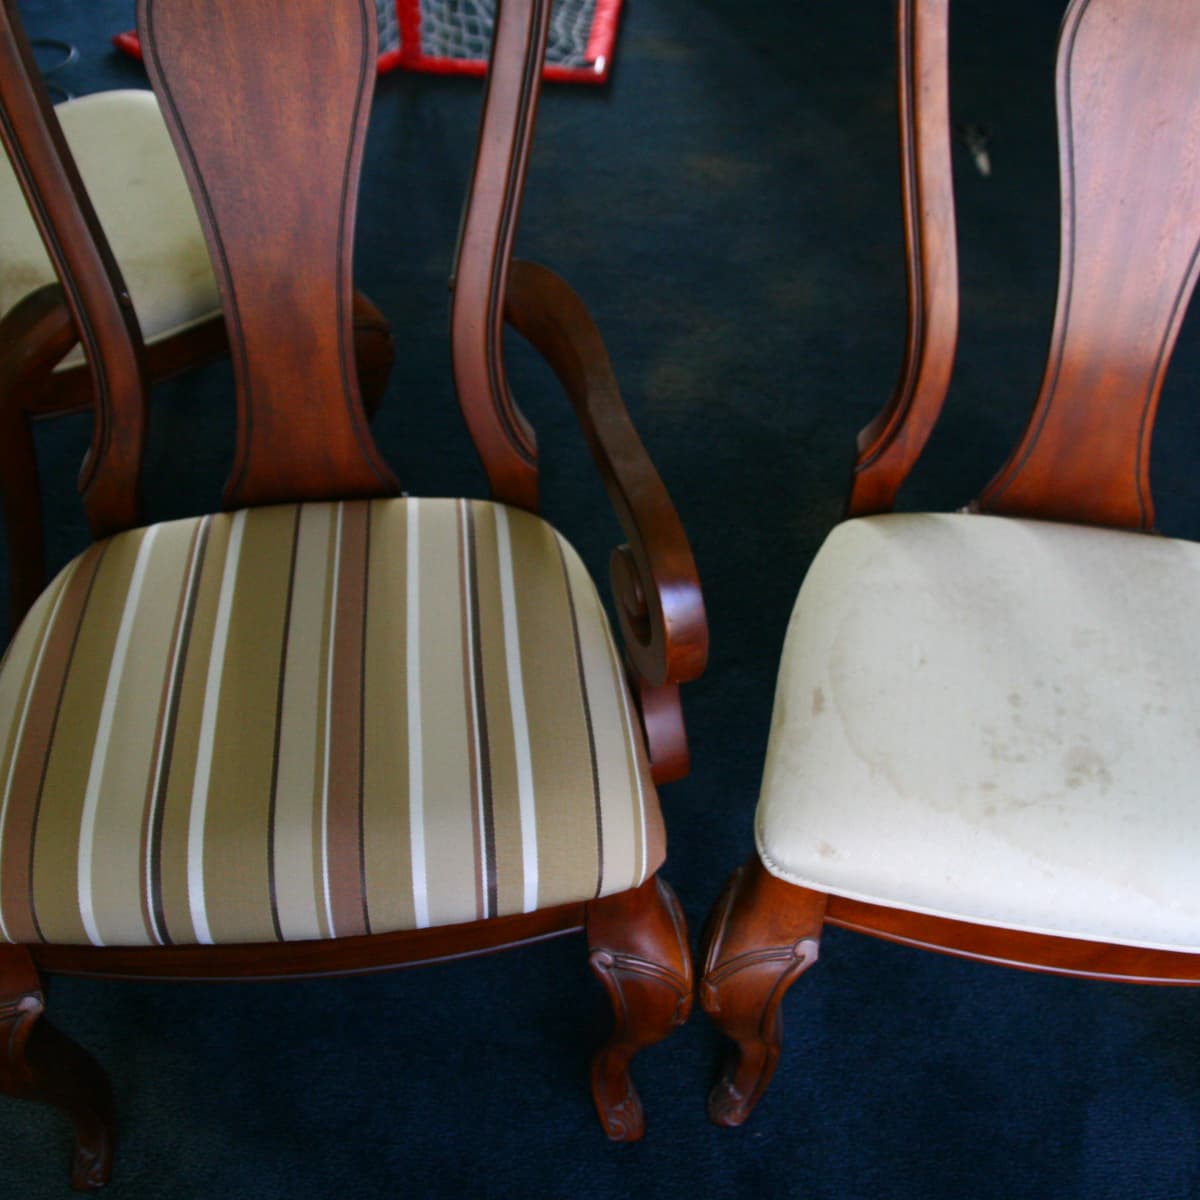 How To Reupholster A Dining Room Chair, Replacement Dining Room Chair Seat Covers